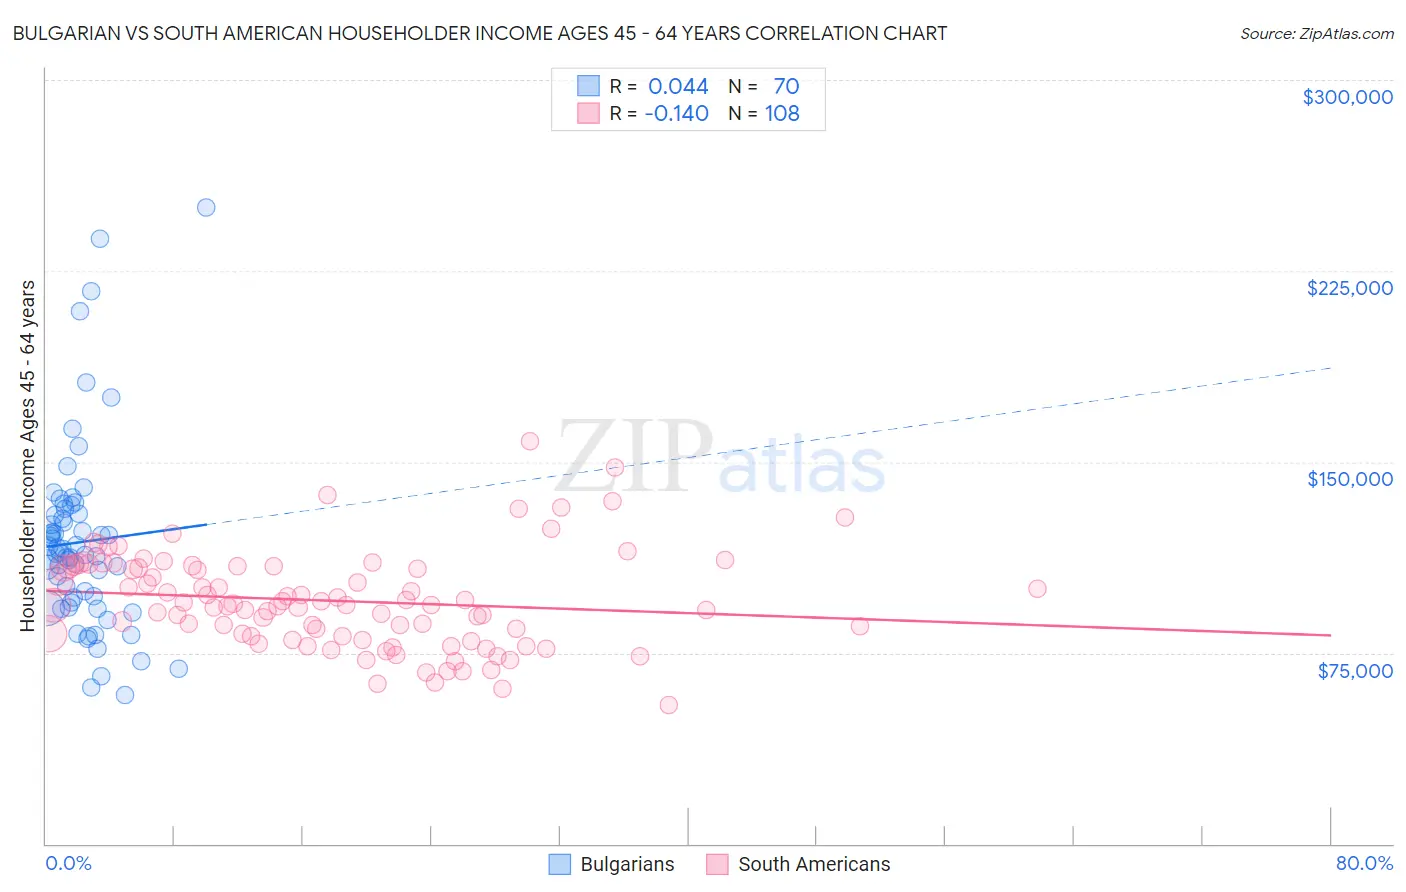 Bulgarian vs South American Householder Income Ages 45 - 64 years